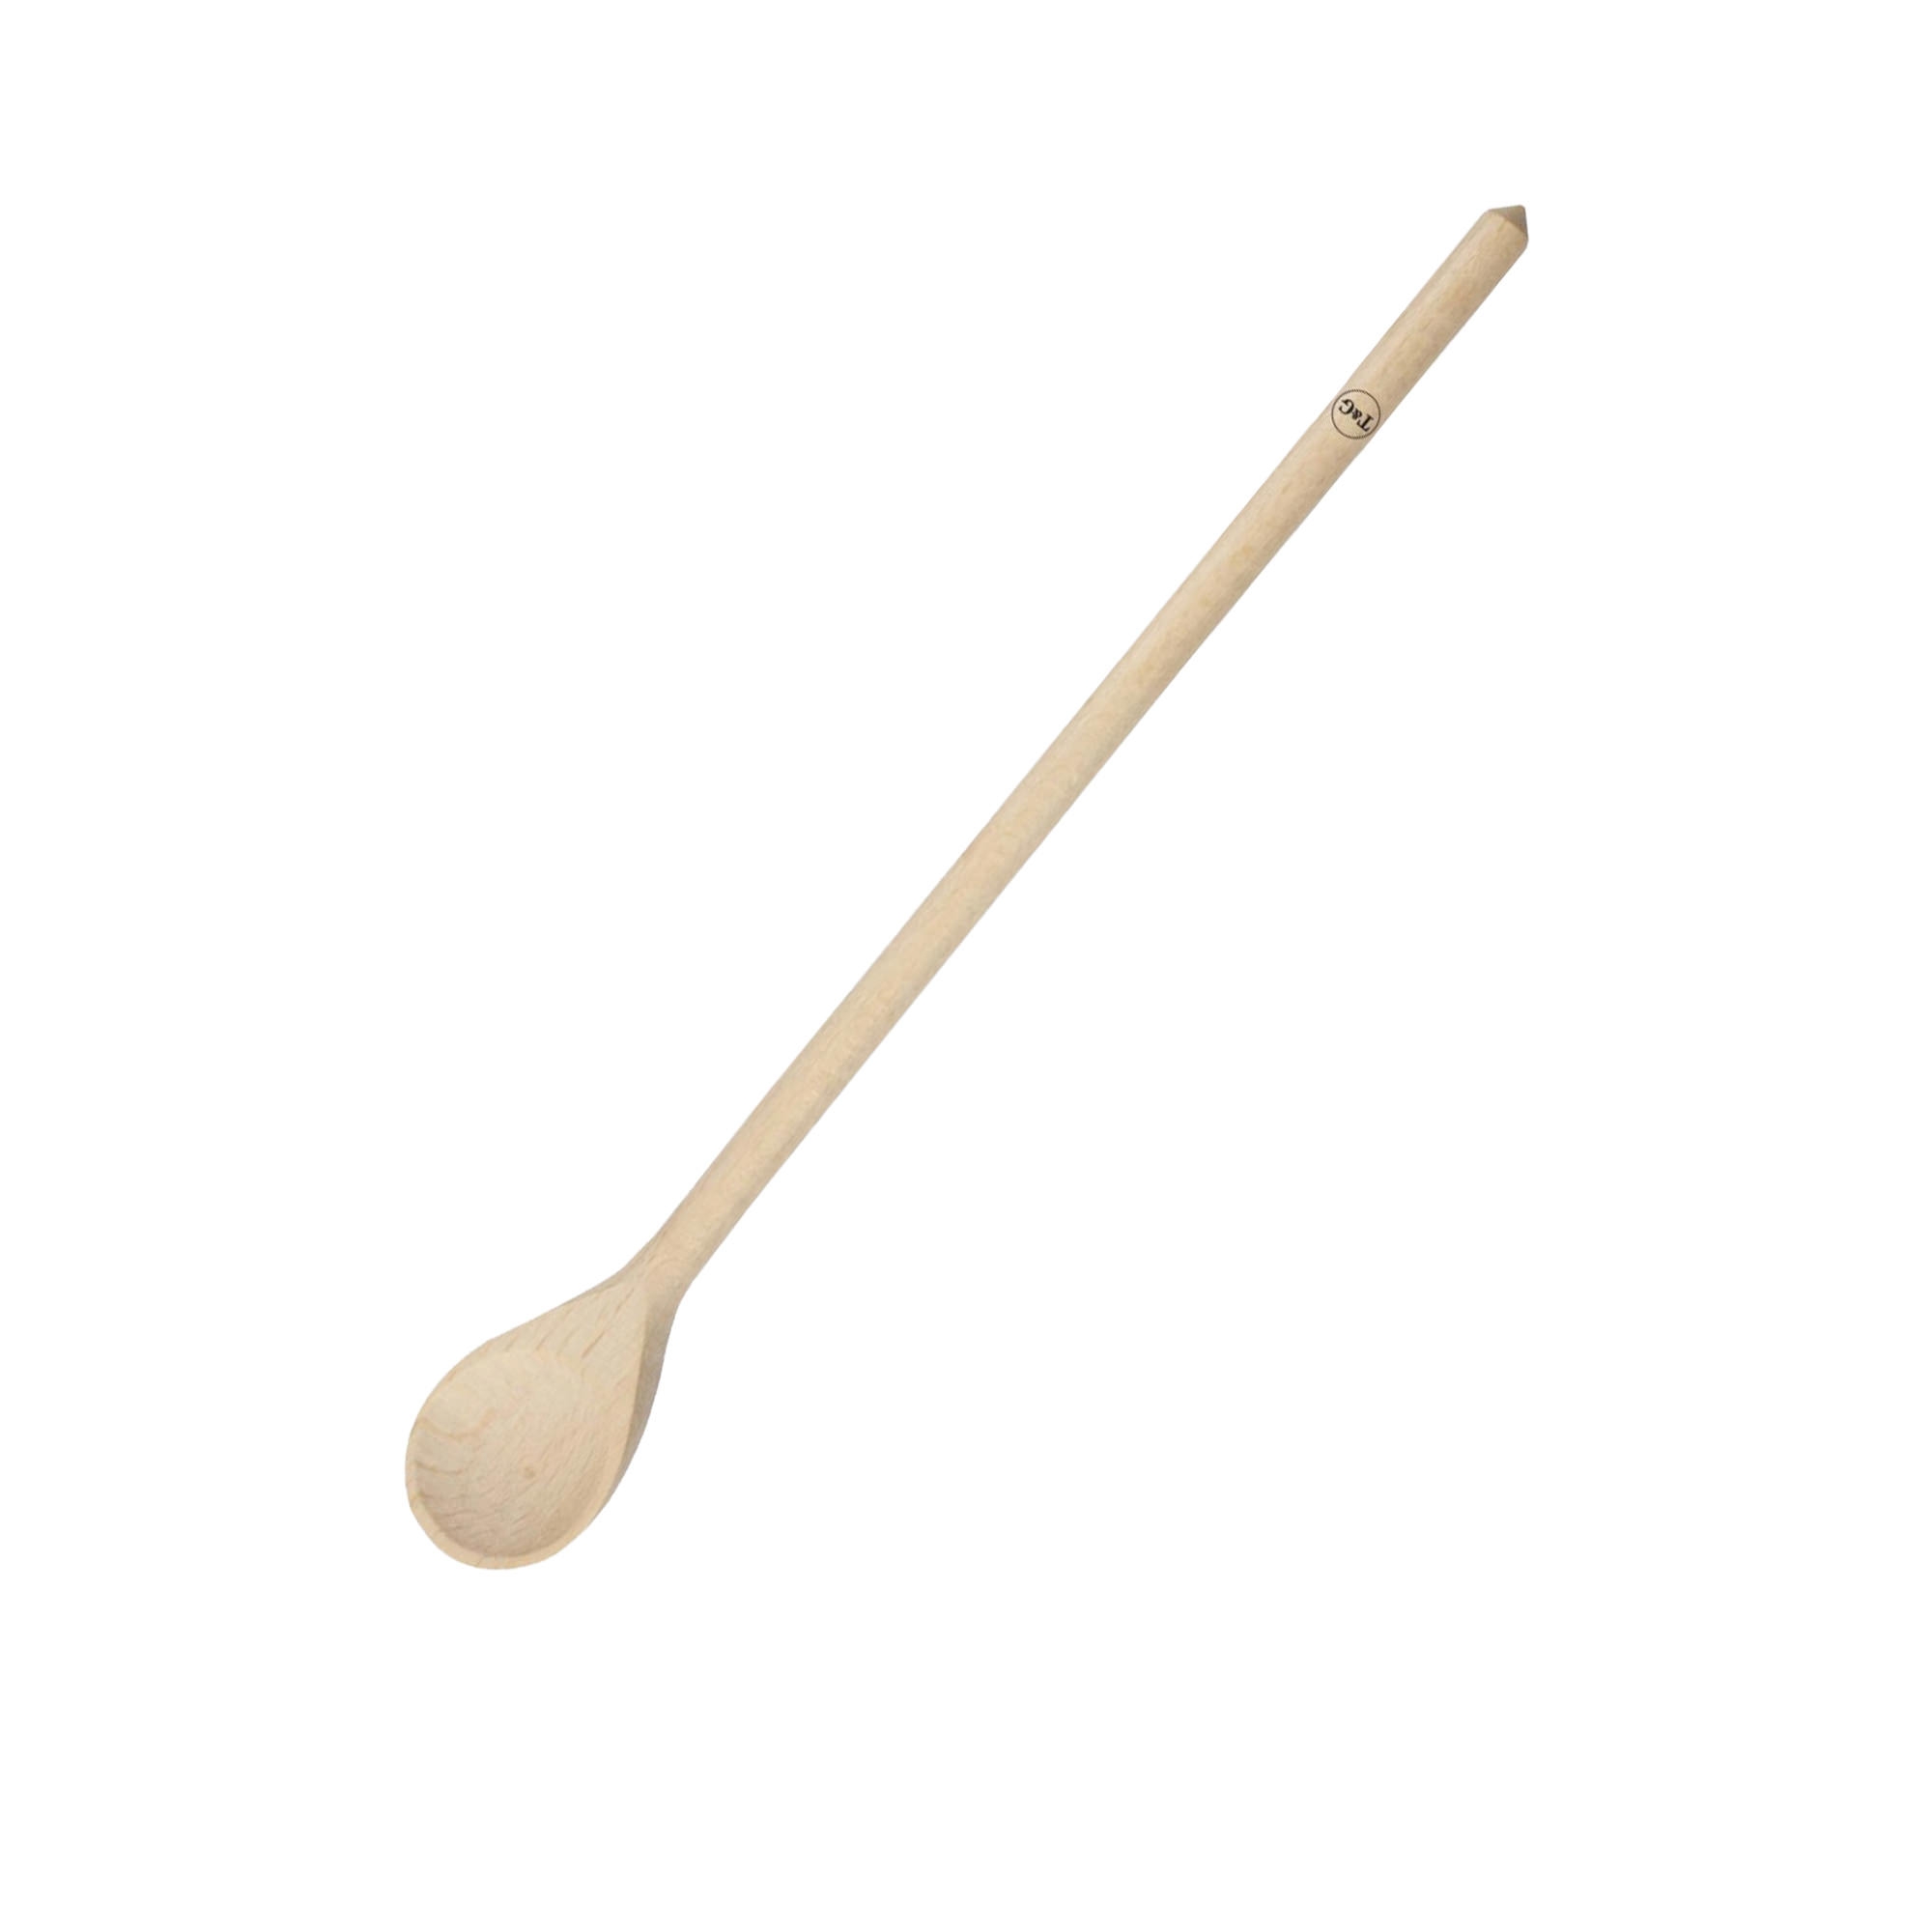 Wild Wood Wooden Cafetiere Spoon 20cm Image 1